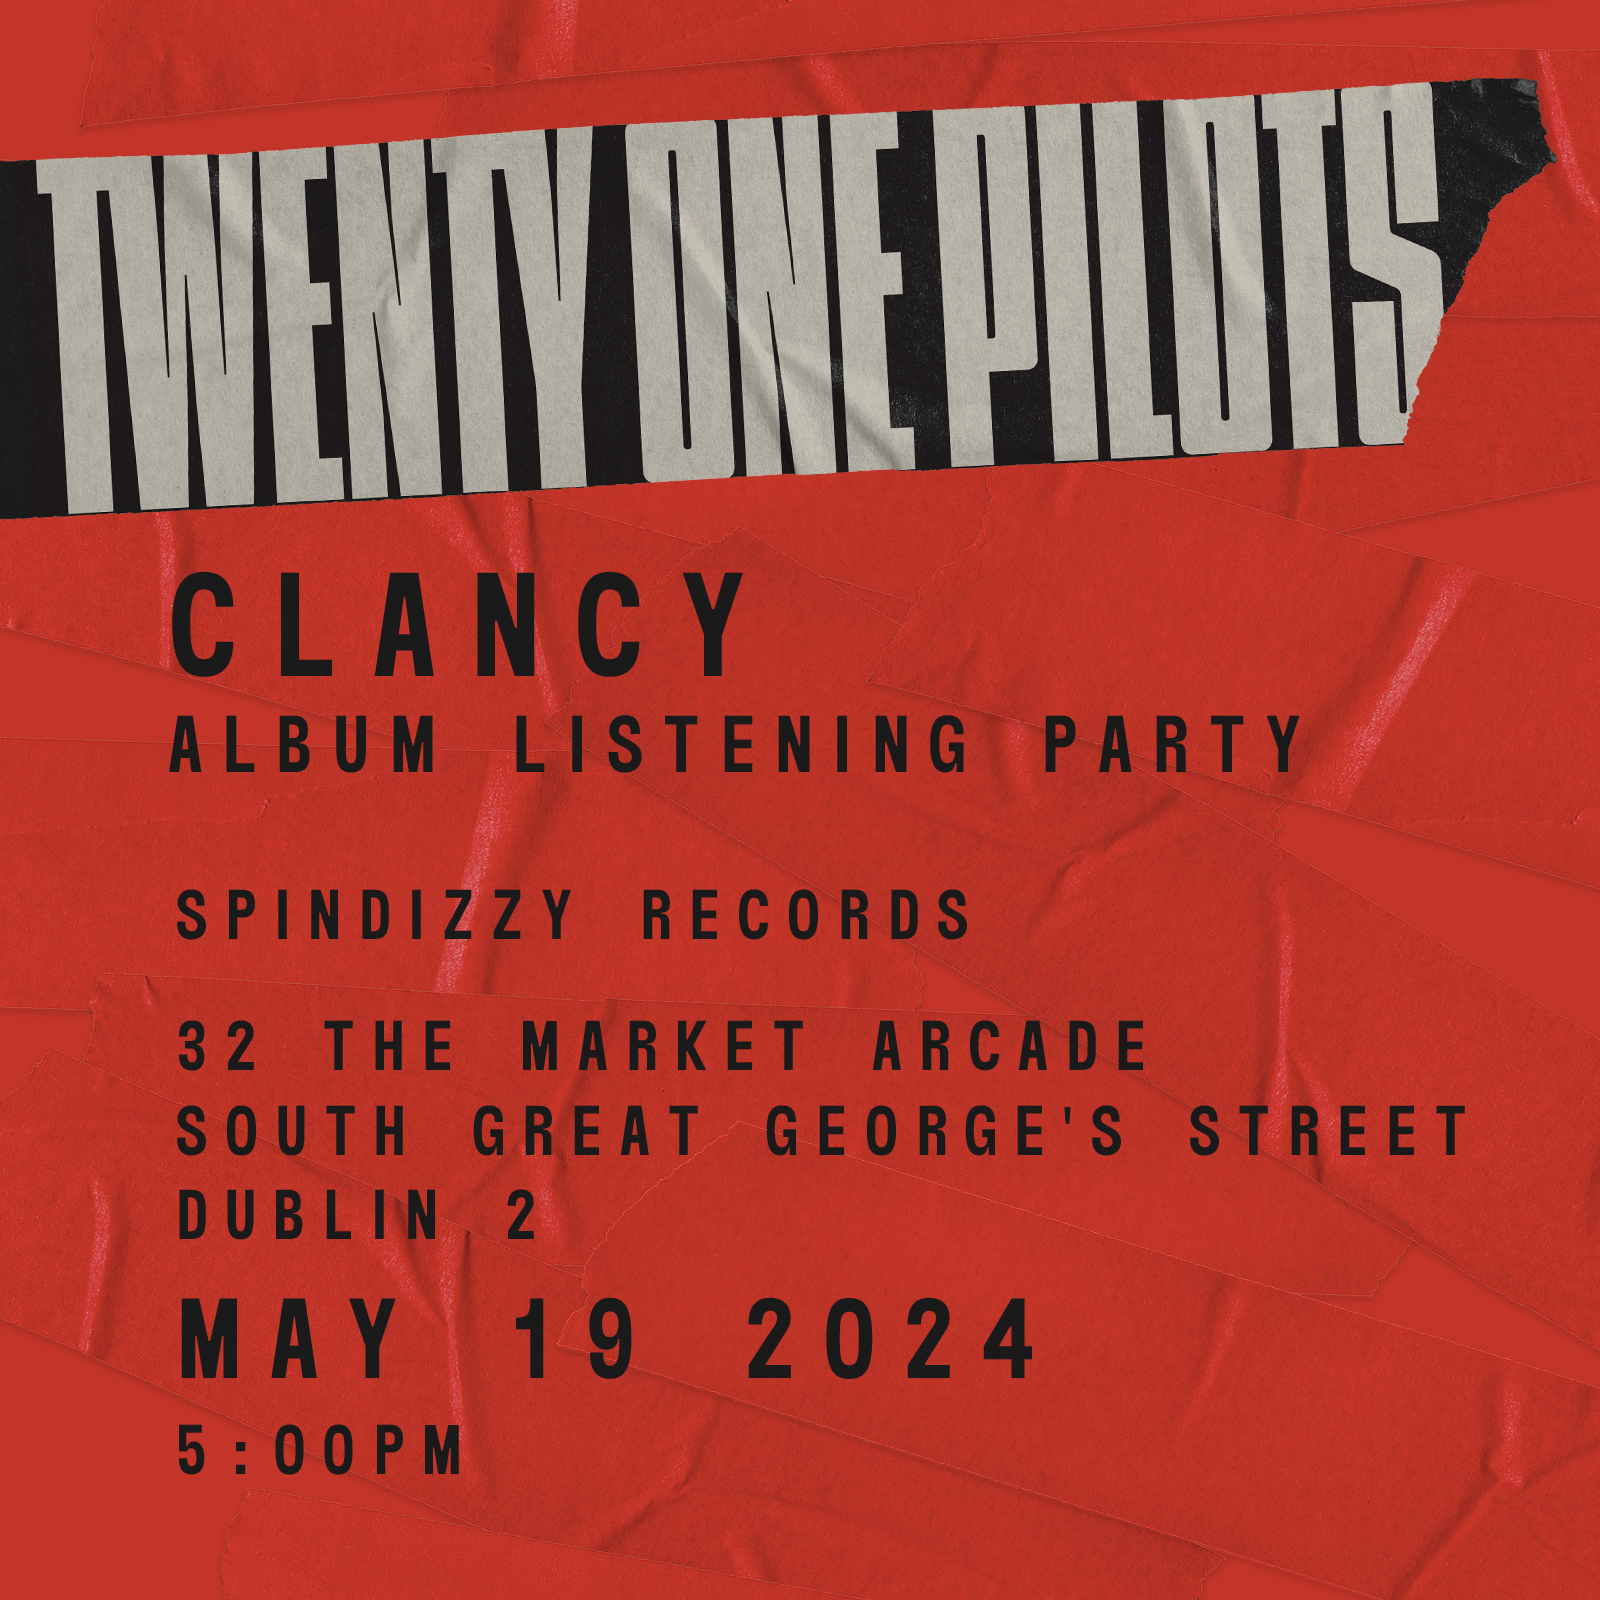 TWENTY ONE PILOTS 'Clancy' - Instore Listening Party - May 19th @ 5pm